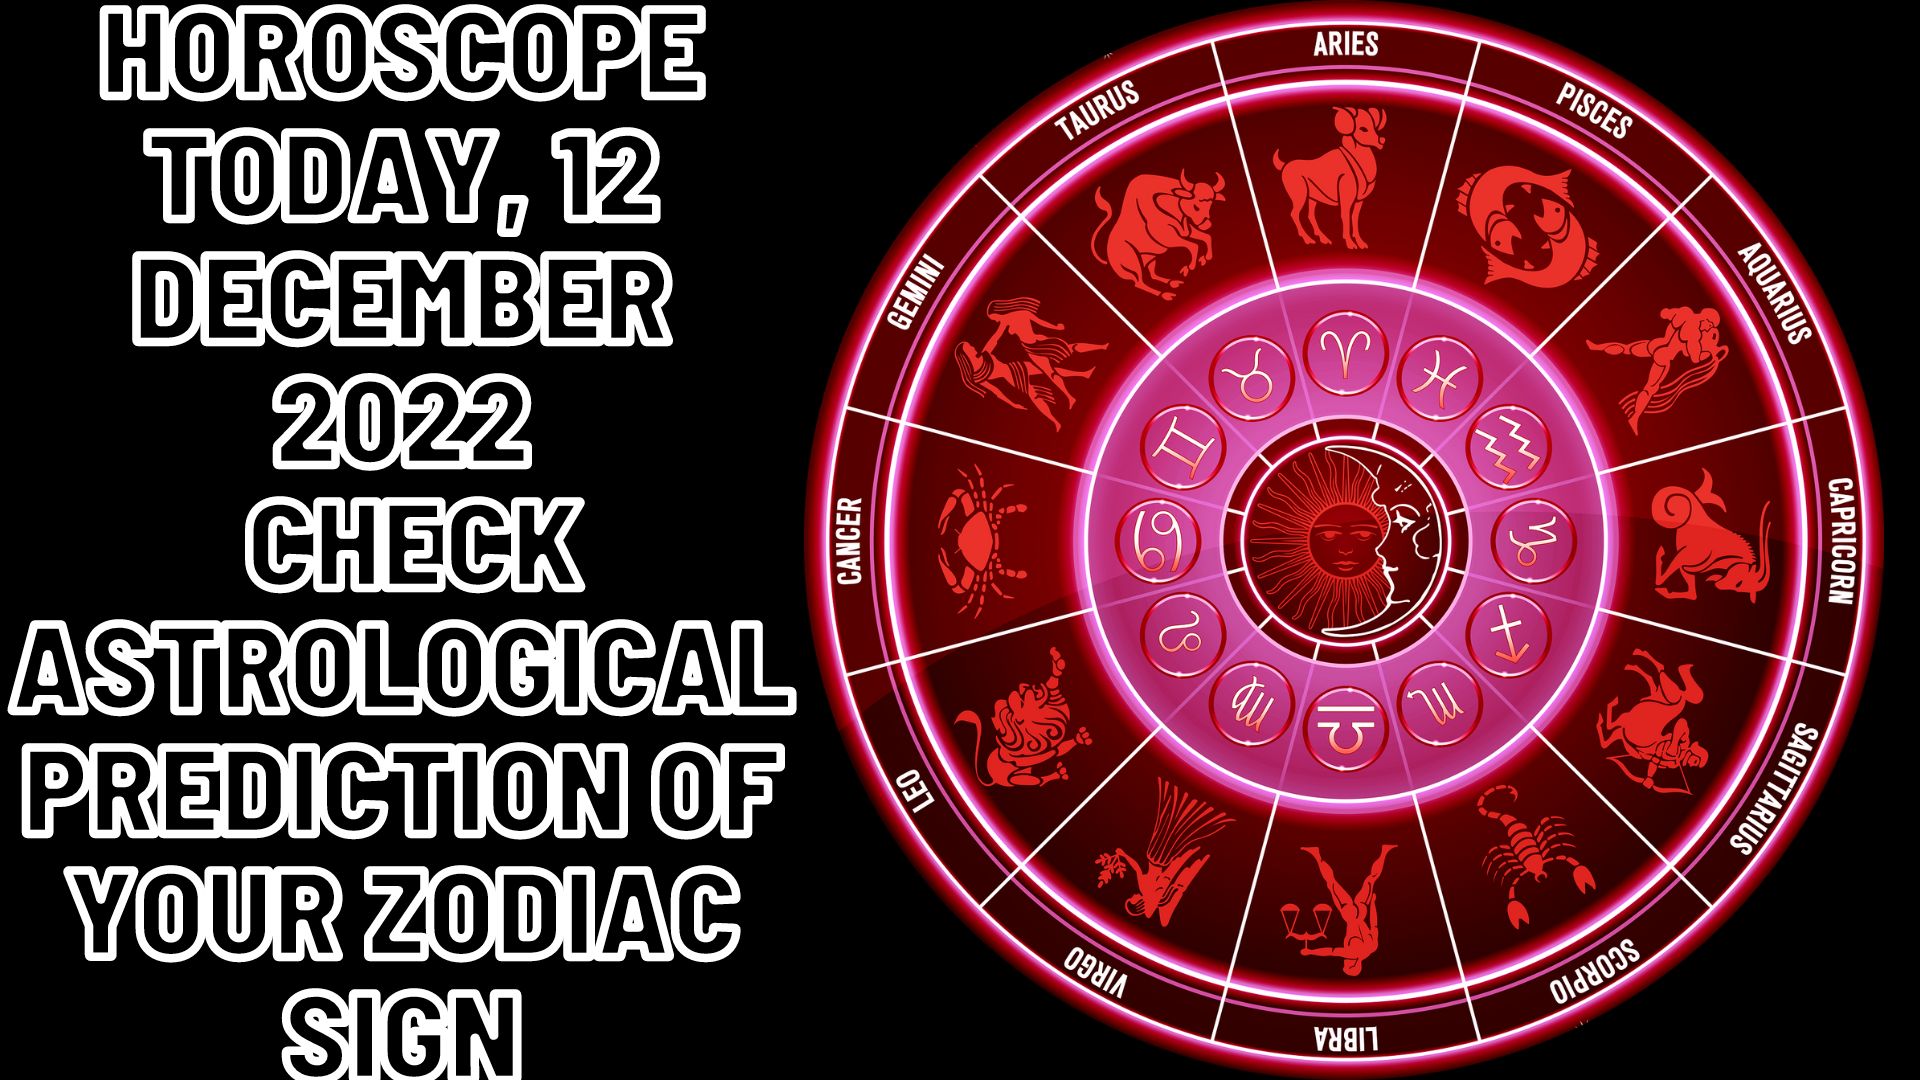 Horoscope Today, 12 December 2022 - Check Astrological Prediction Of Your Zodiac Sign